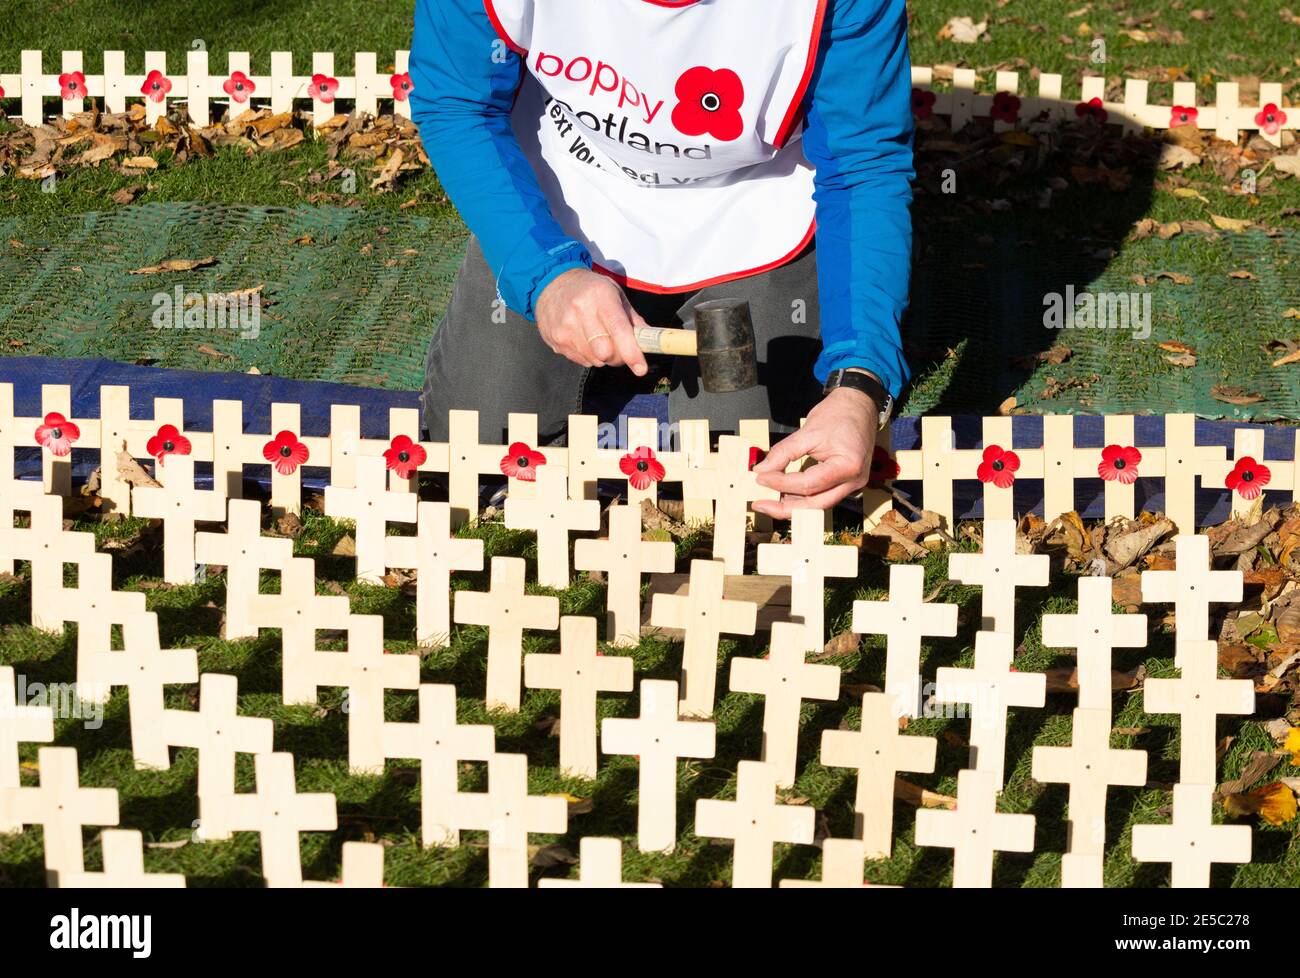 Poppies on wooden crosses. Poppy appeal Remembrance Day UK Stock Photo